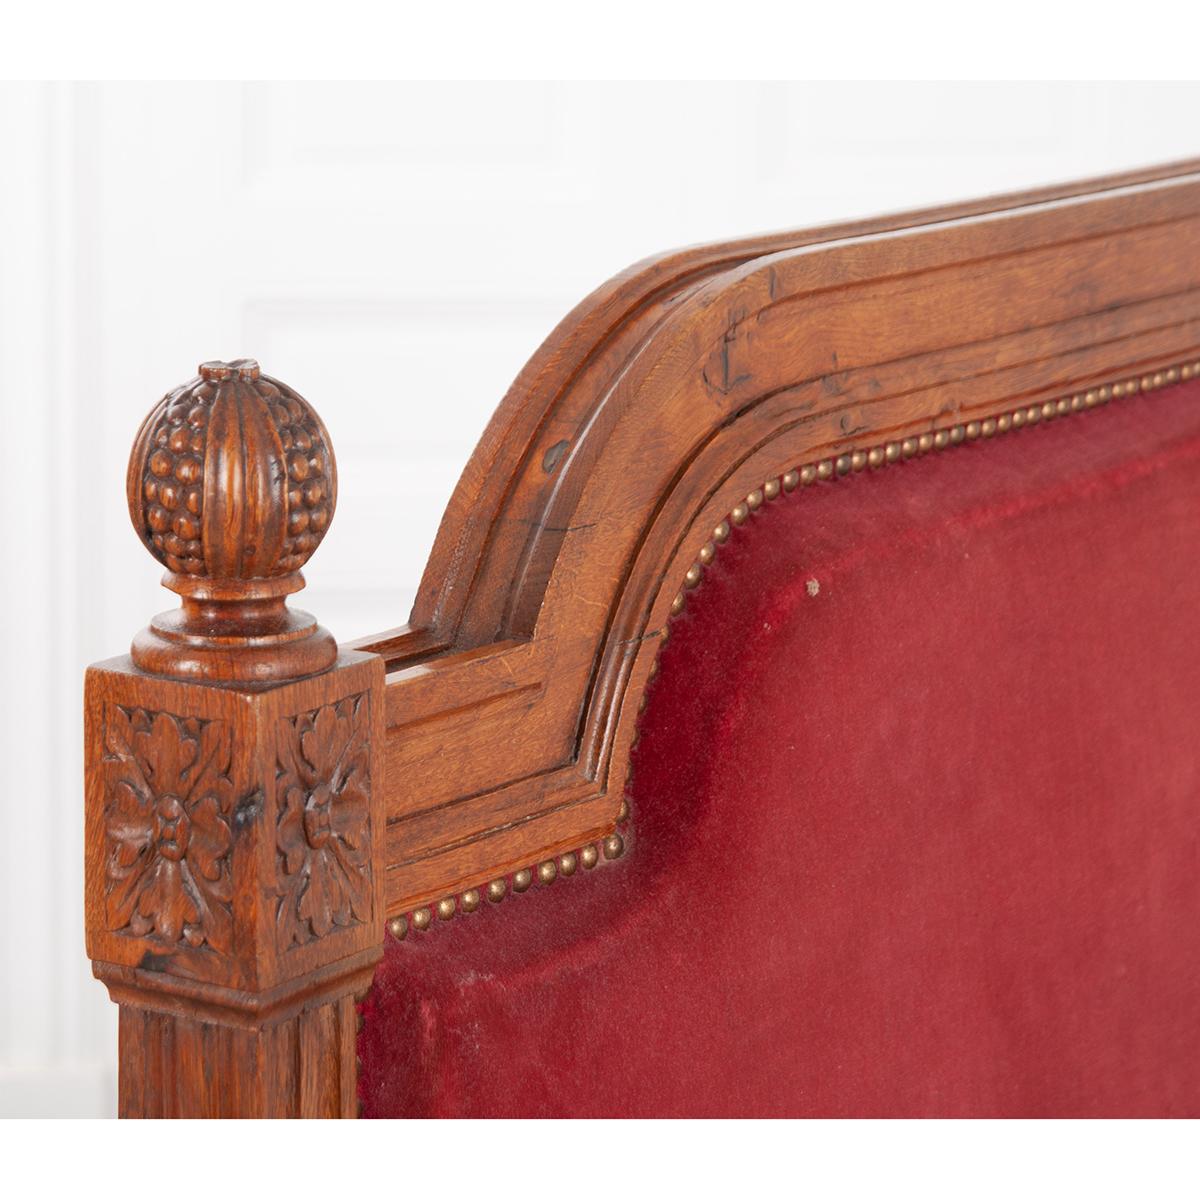 A French 19th century Louis XVI style carved oak daybed. The oak has a wonderful tone and patina. The headboard and the footboard are the same height with an arched top. It has square fluted columns on each side that frame the worn rose colored